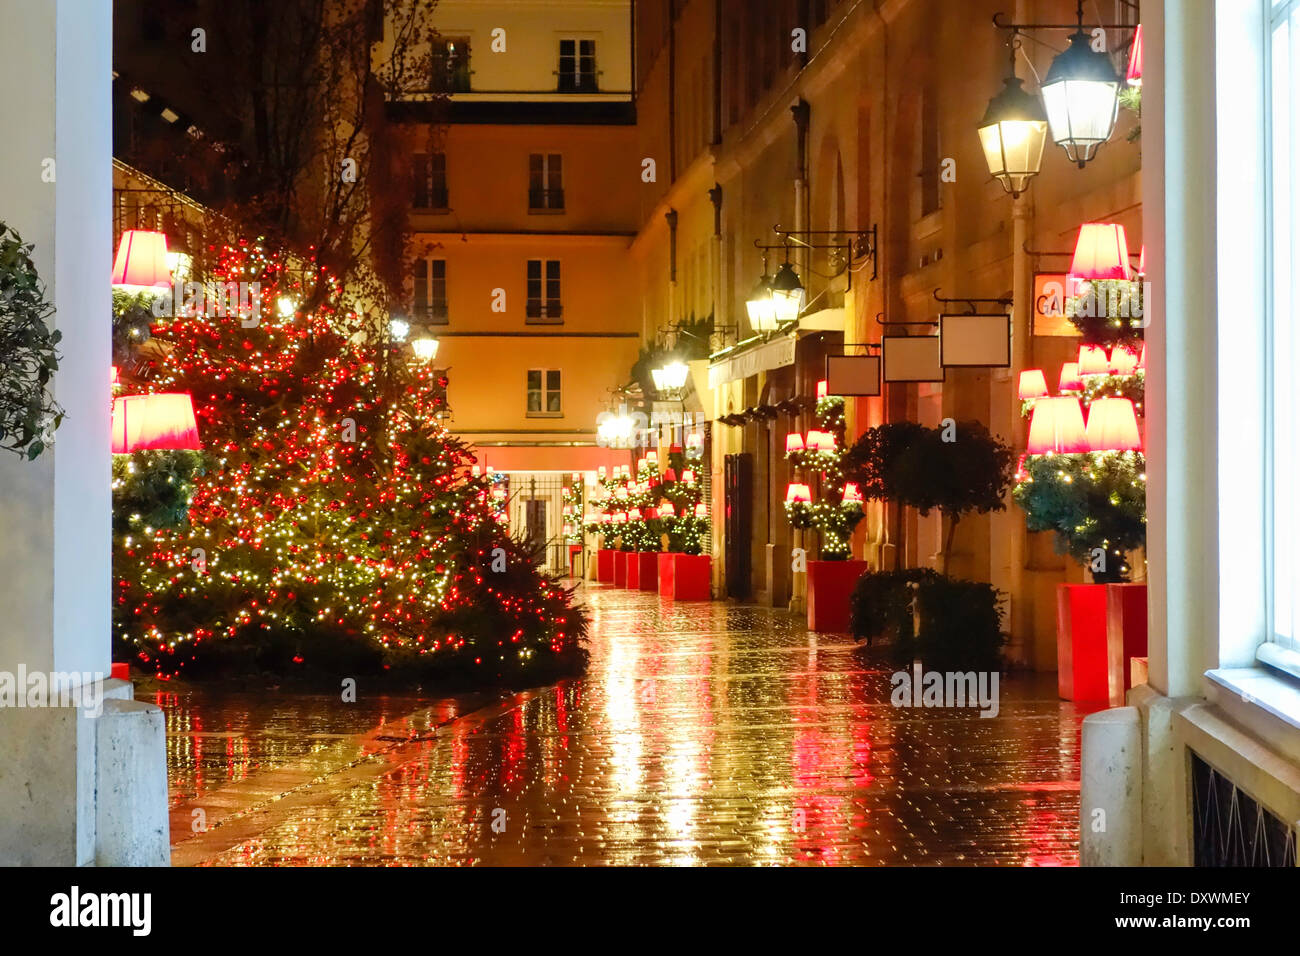 Village Royal at night with Christmas decorations, Paris, France ...